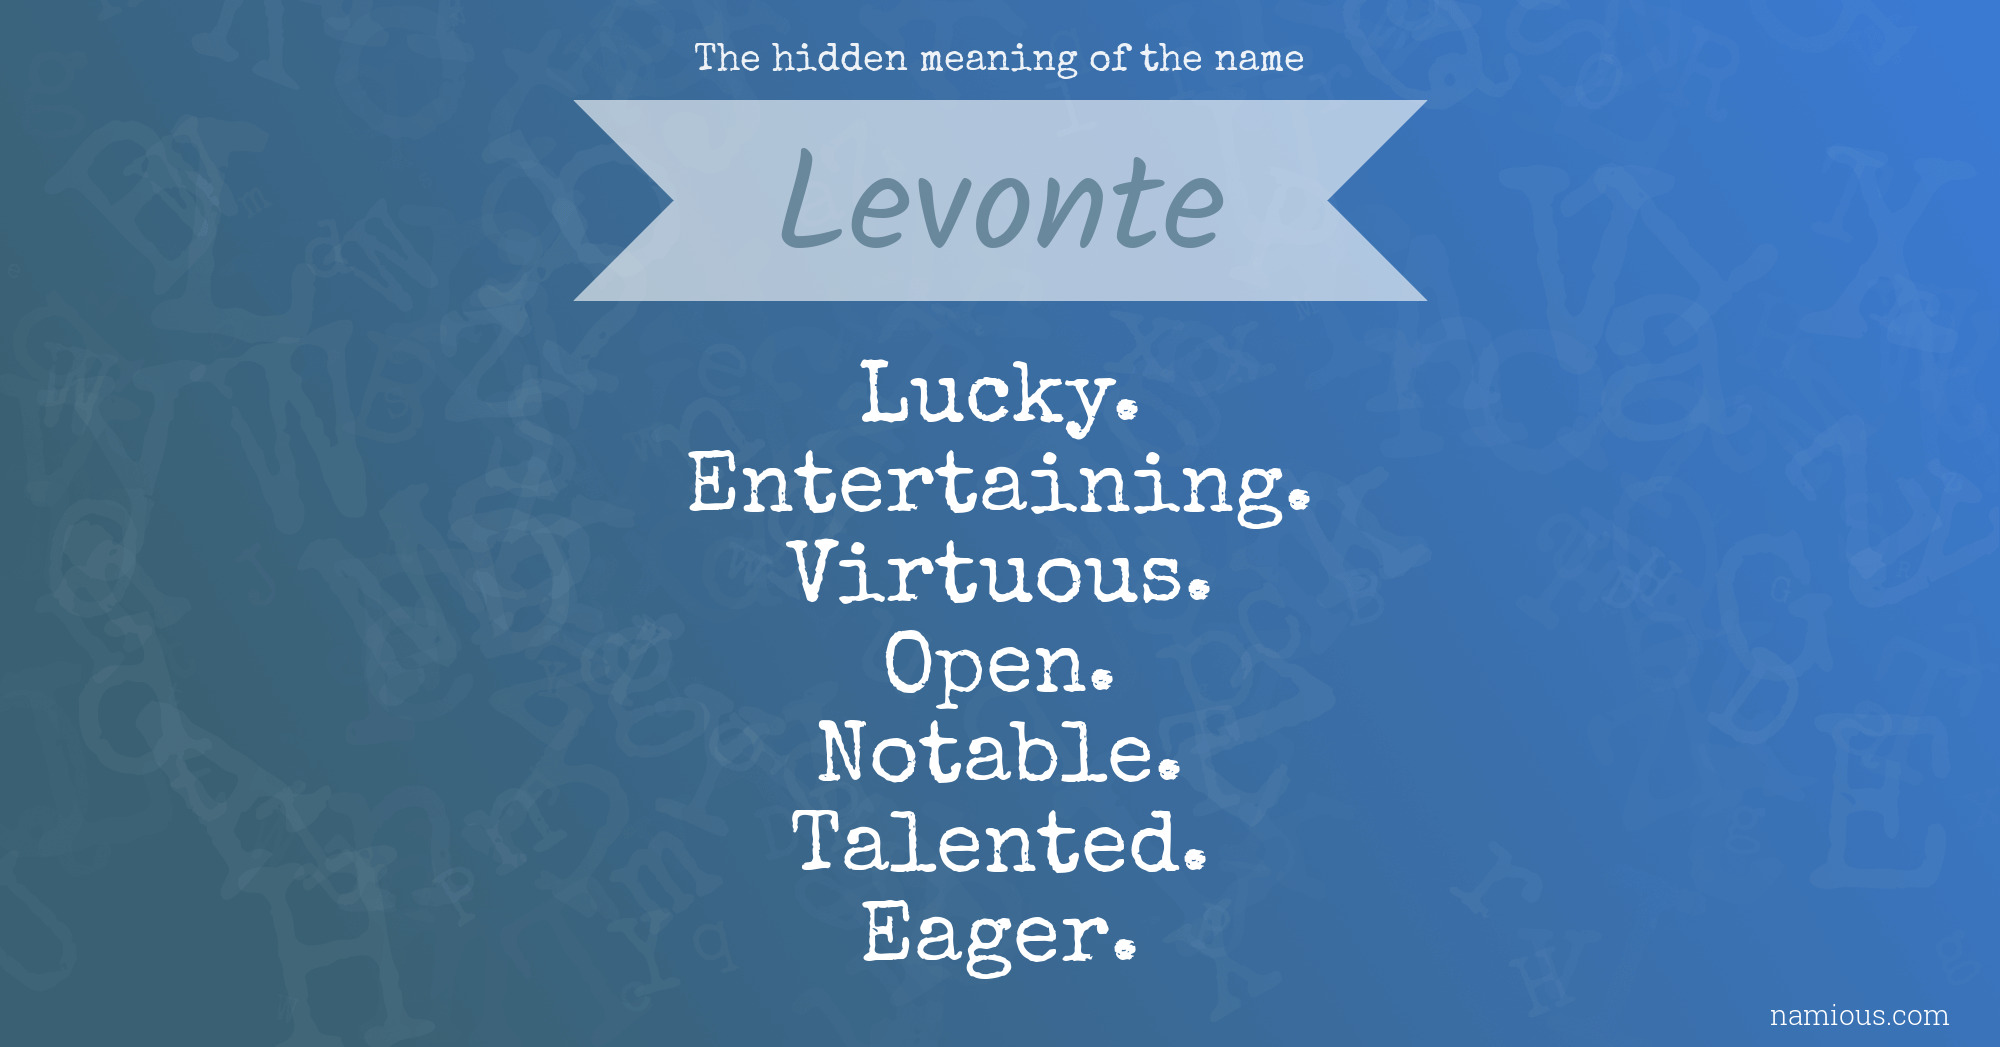 The hidden meaning of the name Levonte